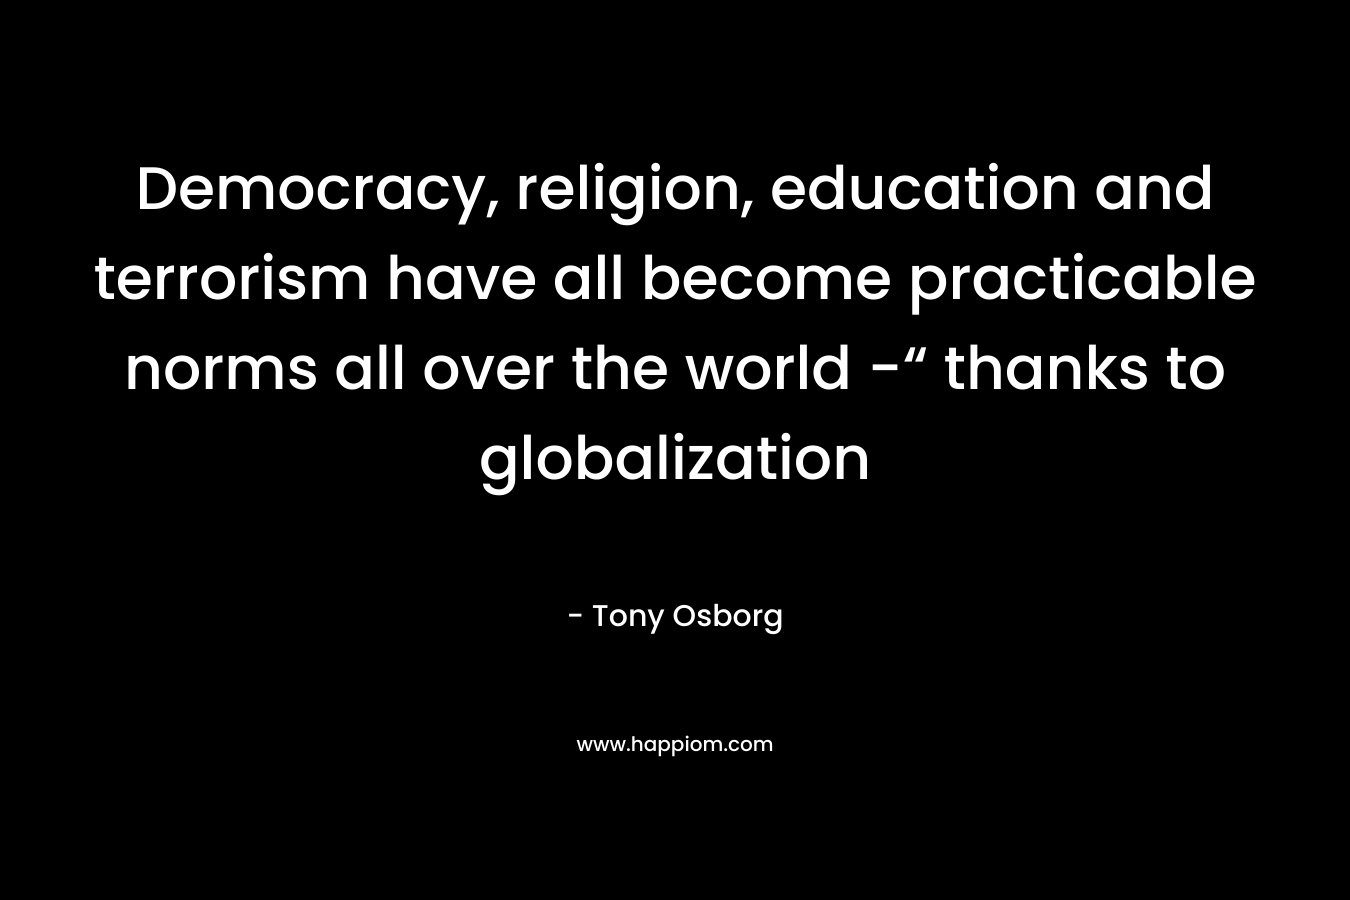 Democracy, religion, education and terrorism have all become practicable norms all over the world -“ thanks to globalization – Tony Osborg